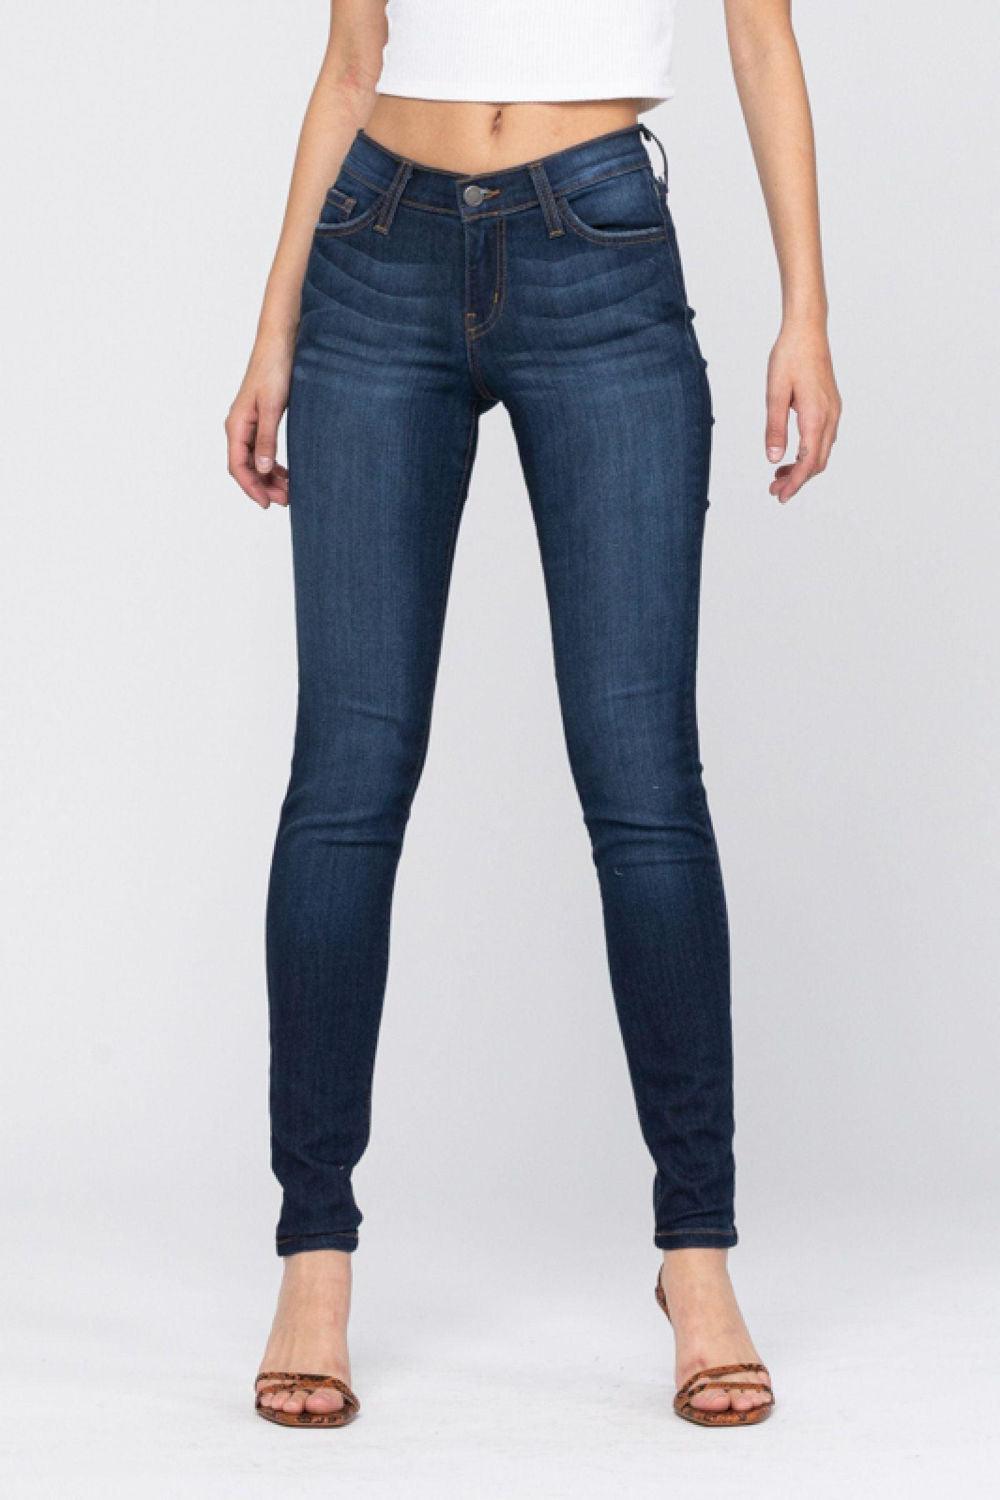 Judy Blue Dark Midrise Skinny Jeans-Ankle 28.5 " inseam - Strawberry Moon Boutique